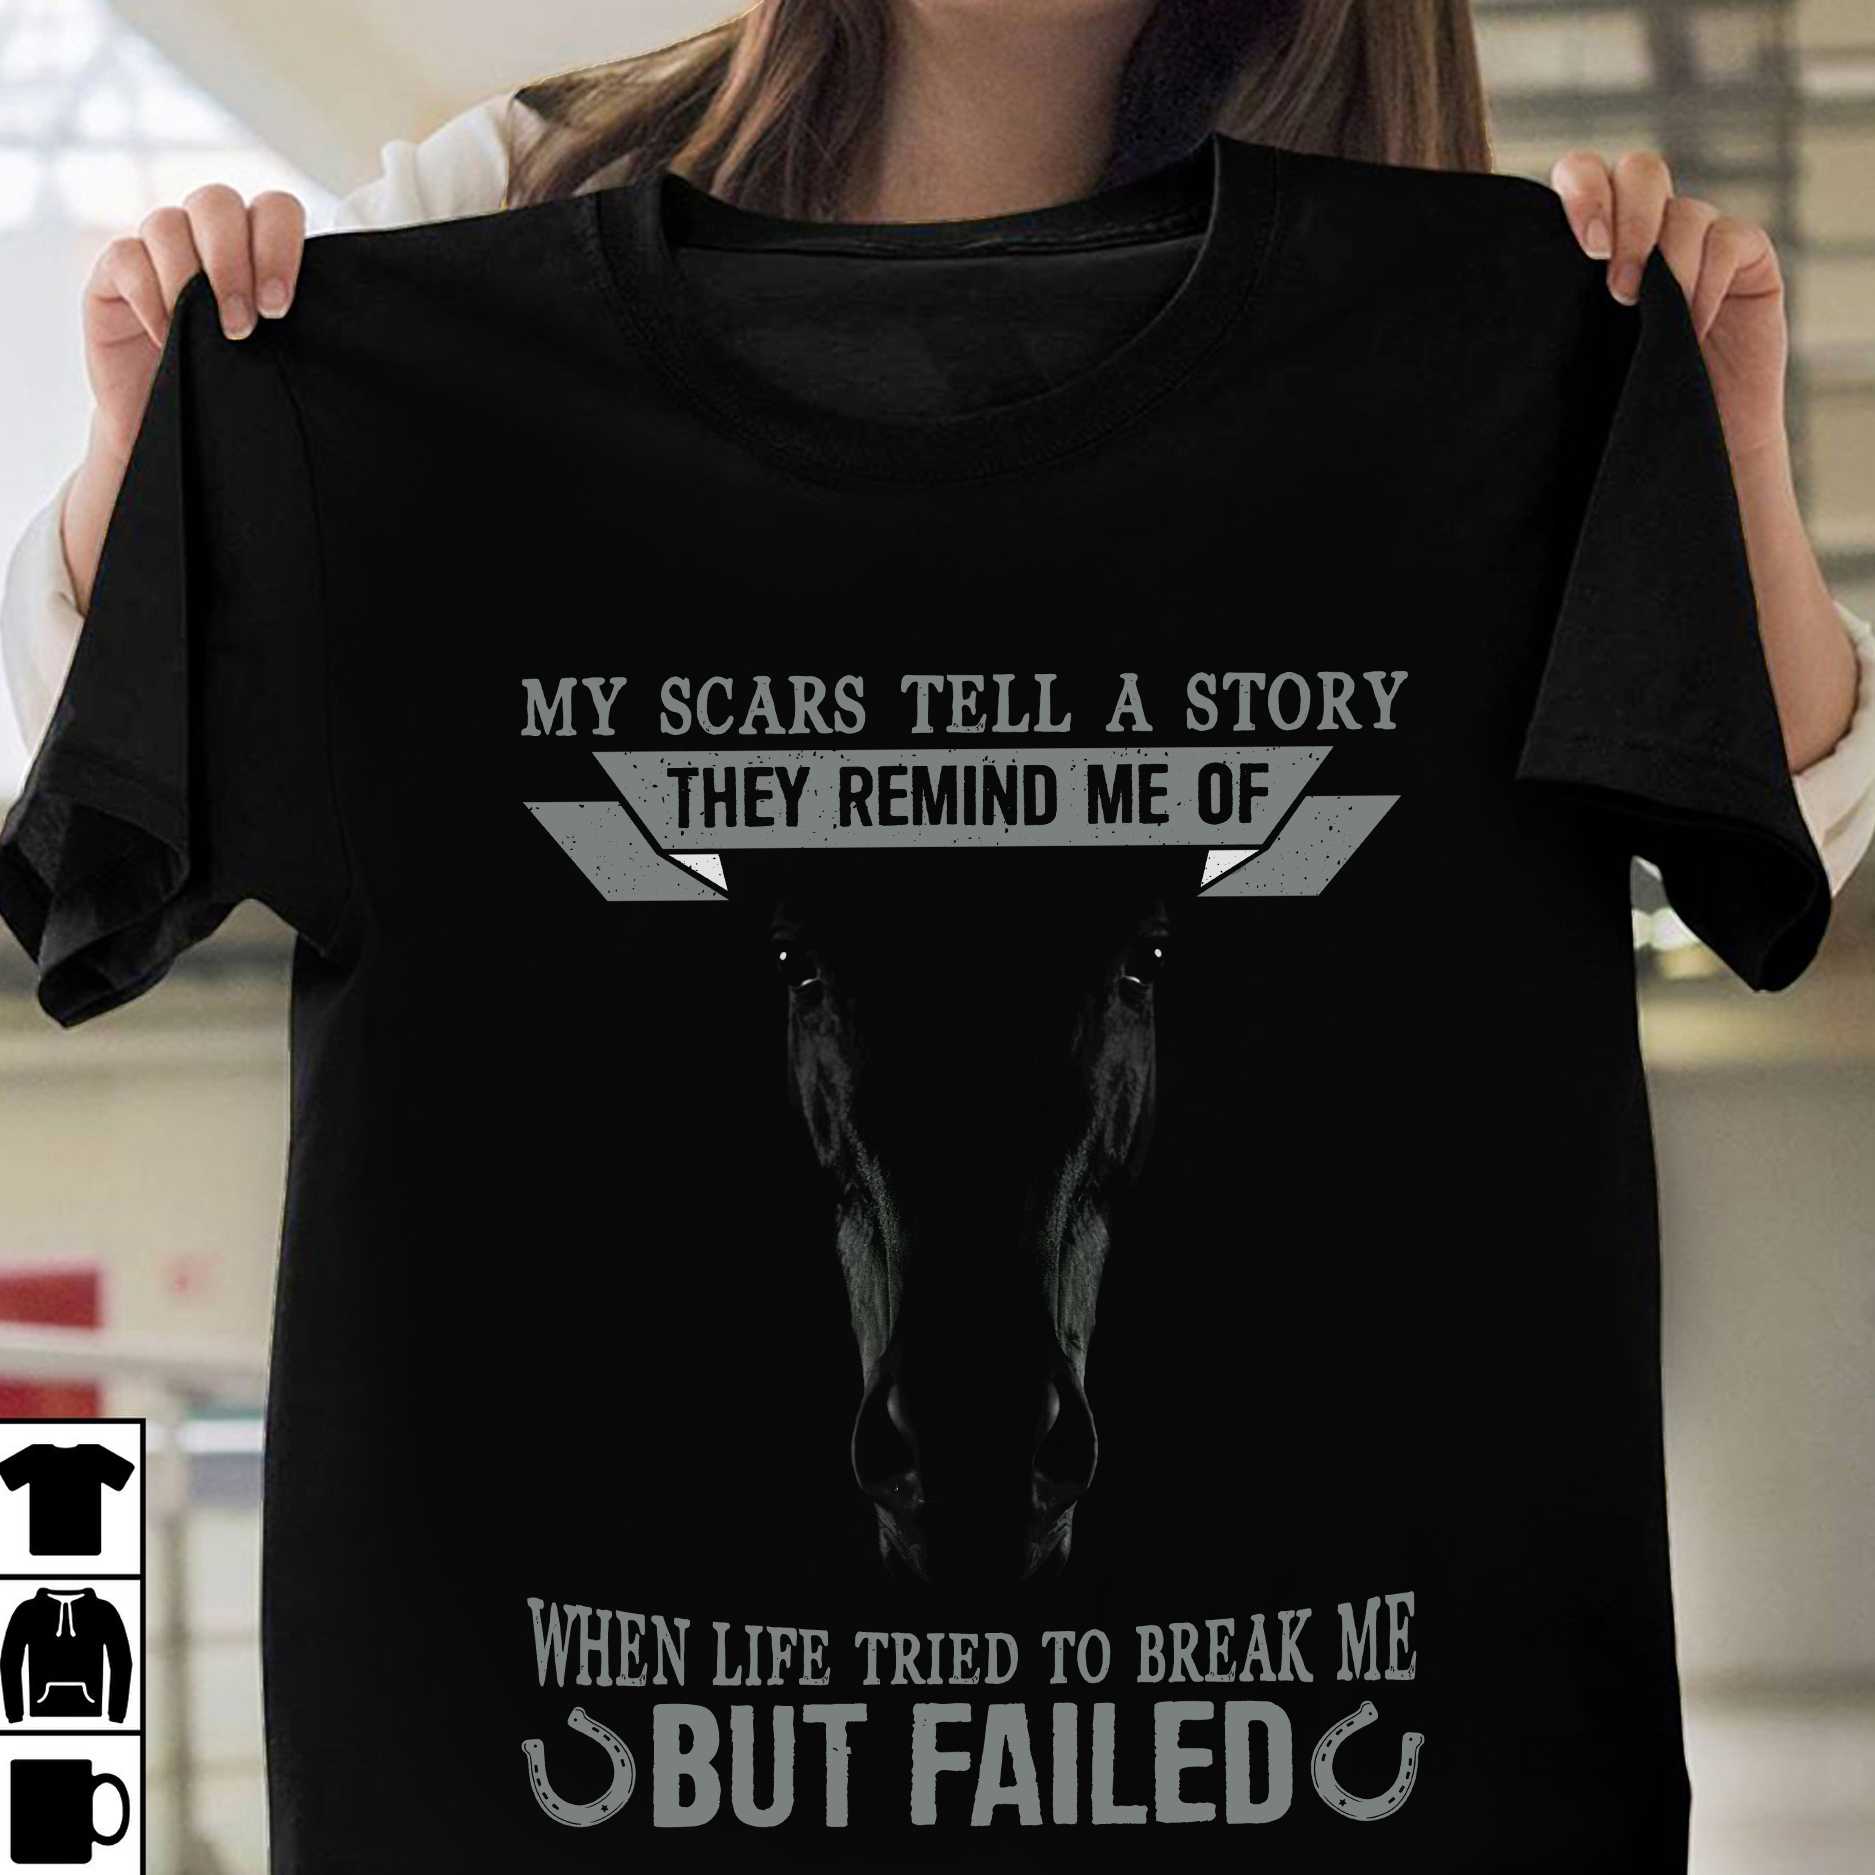 My scars tell a story, they remind me of when life tried to break me but failed - Black horse